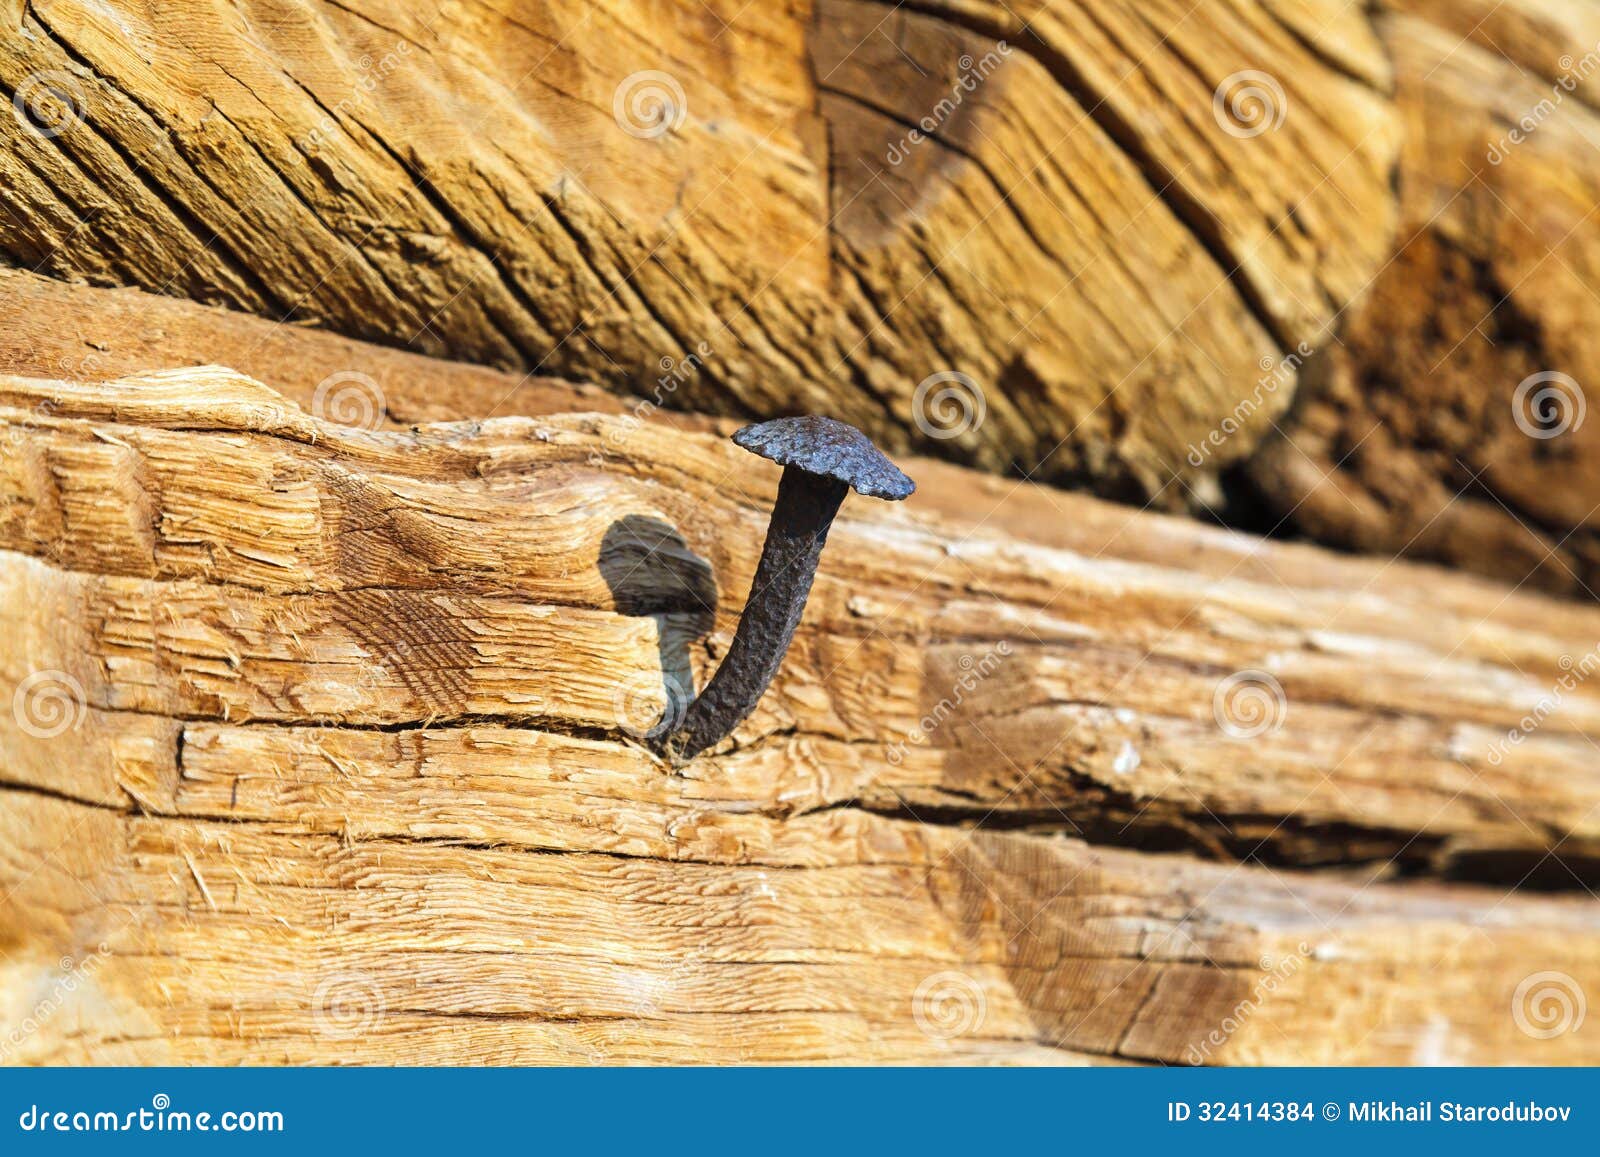 Log wallpaper with the texture of logs